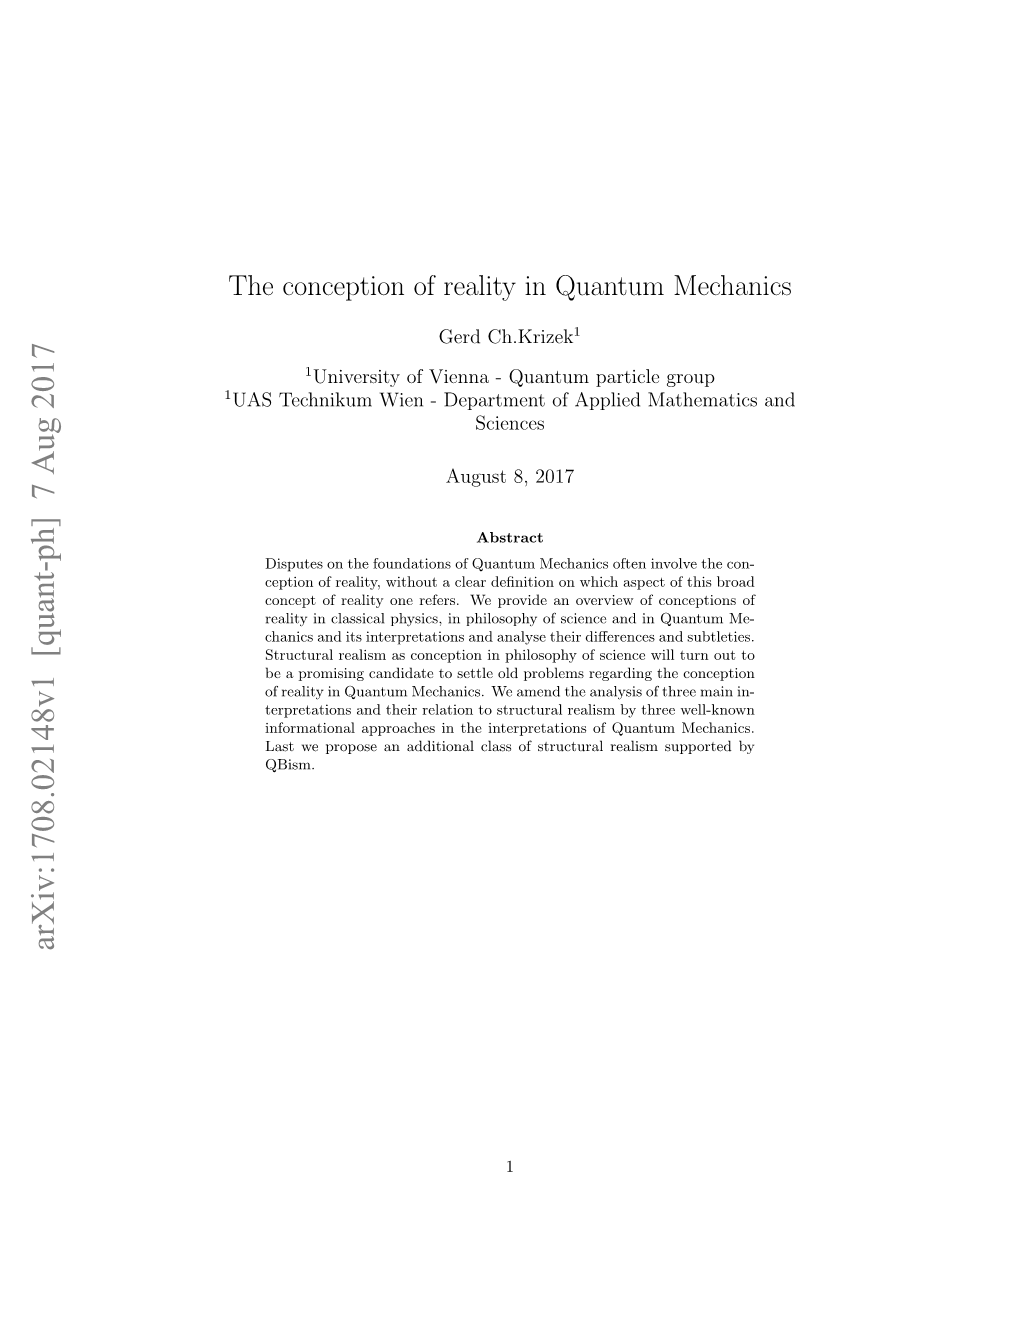 The Conception of Reality in Quantum Mechanics